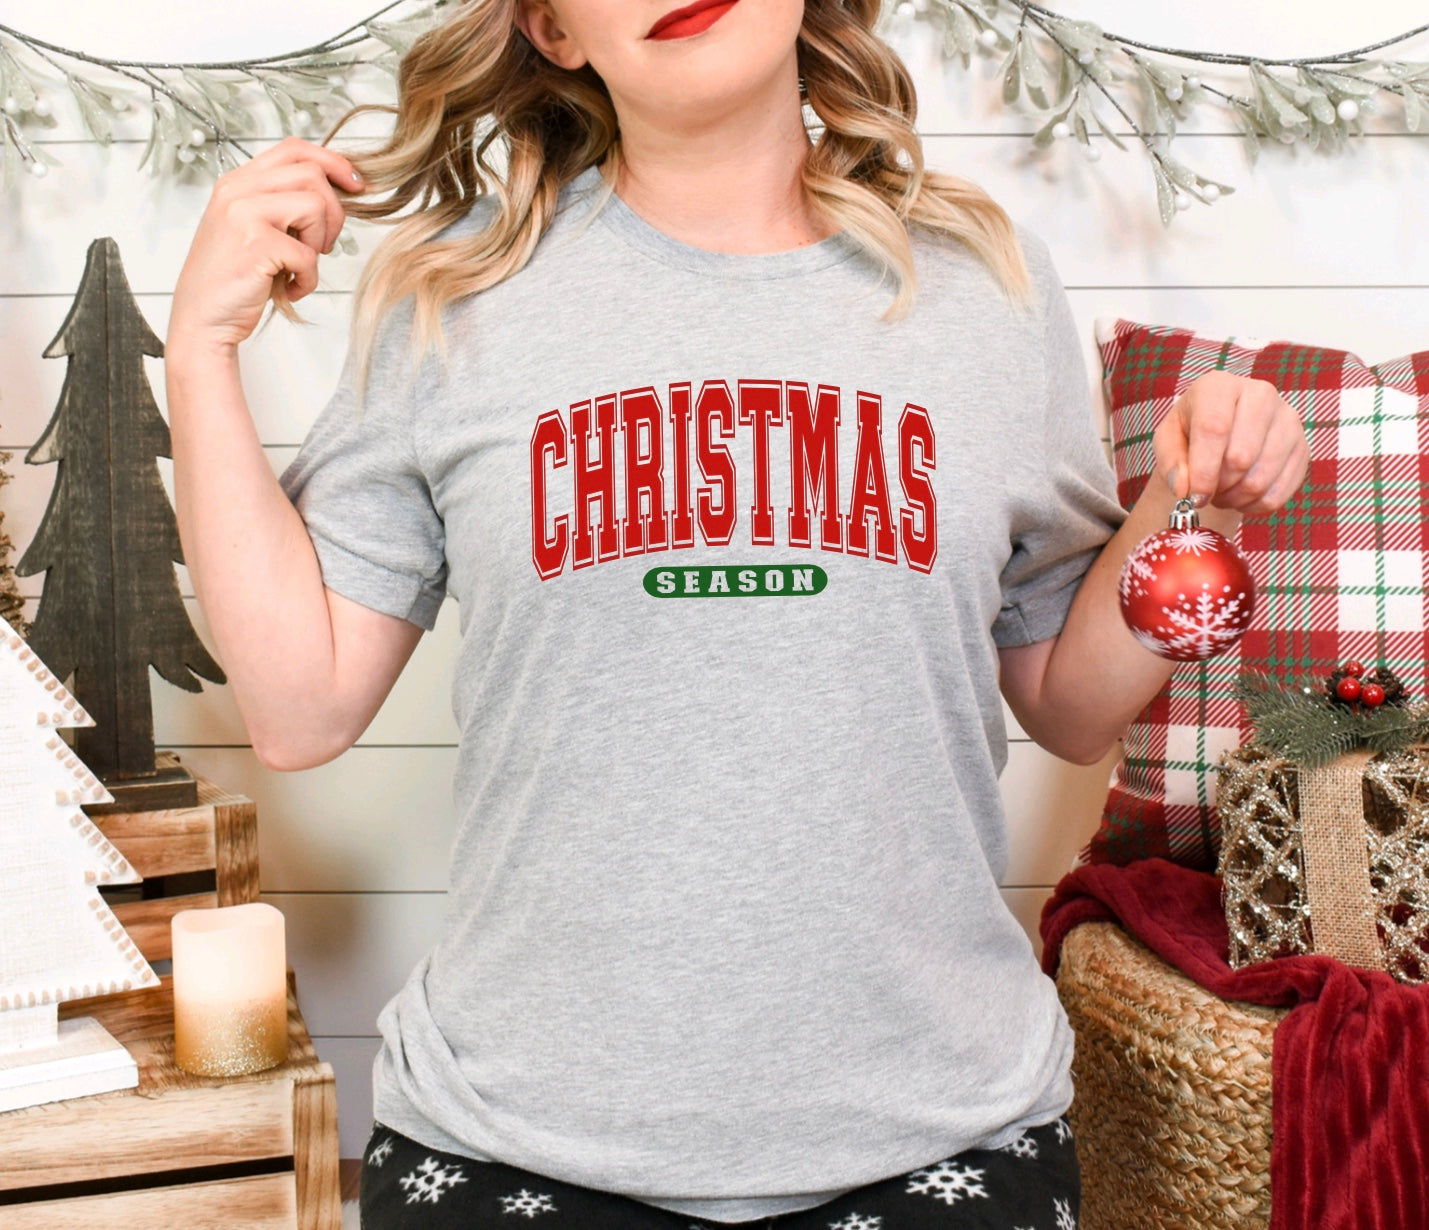 Christmas Season varsity font unisex t-shirt in grey with red and green graphic